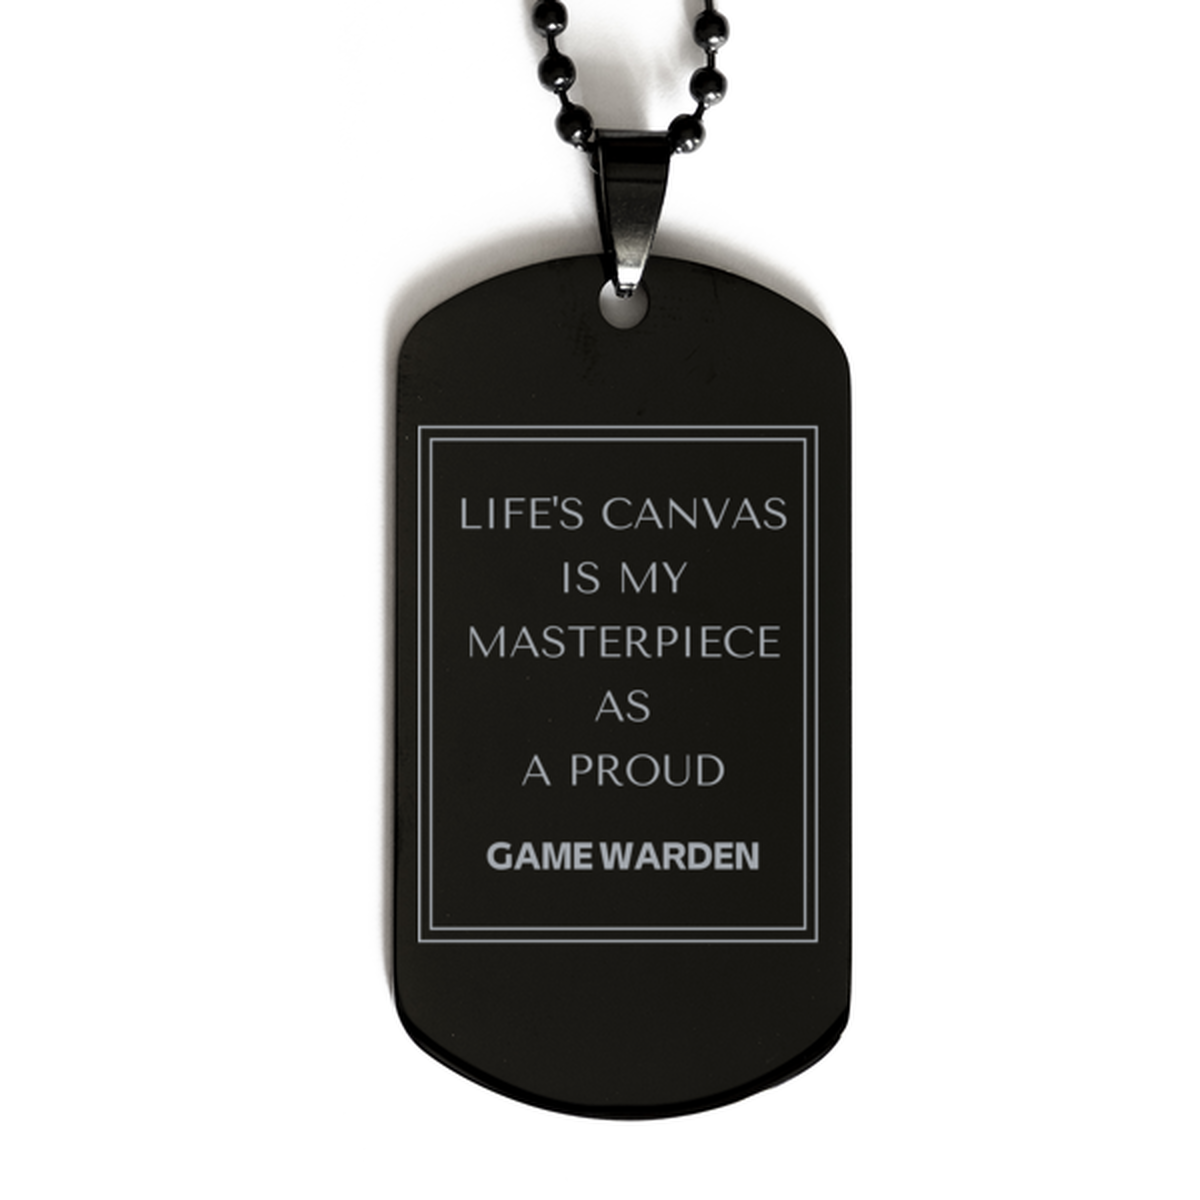 Proud Game Warden Gifts, Life's canvas is my masterpiece, Epic Birthday Christmas Unique Black Dog Tag For Game Warden, Coworkers, Men, Women, Friends